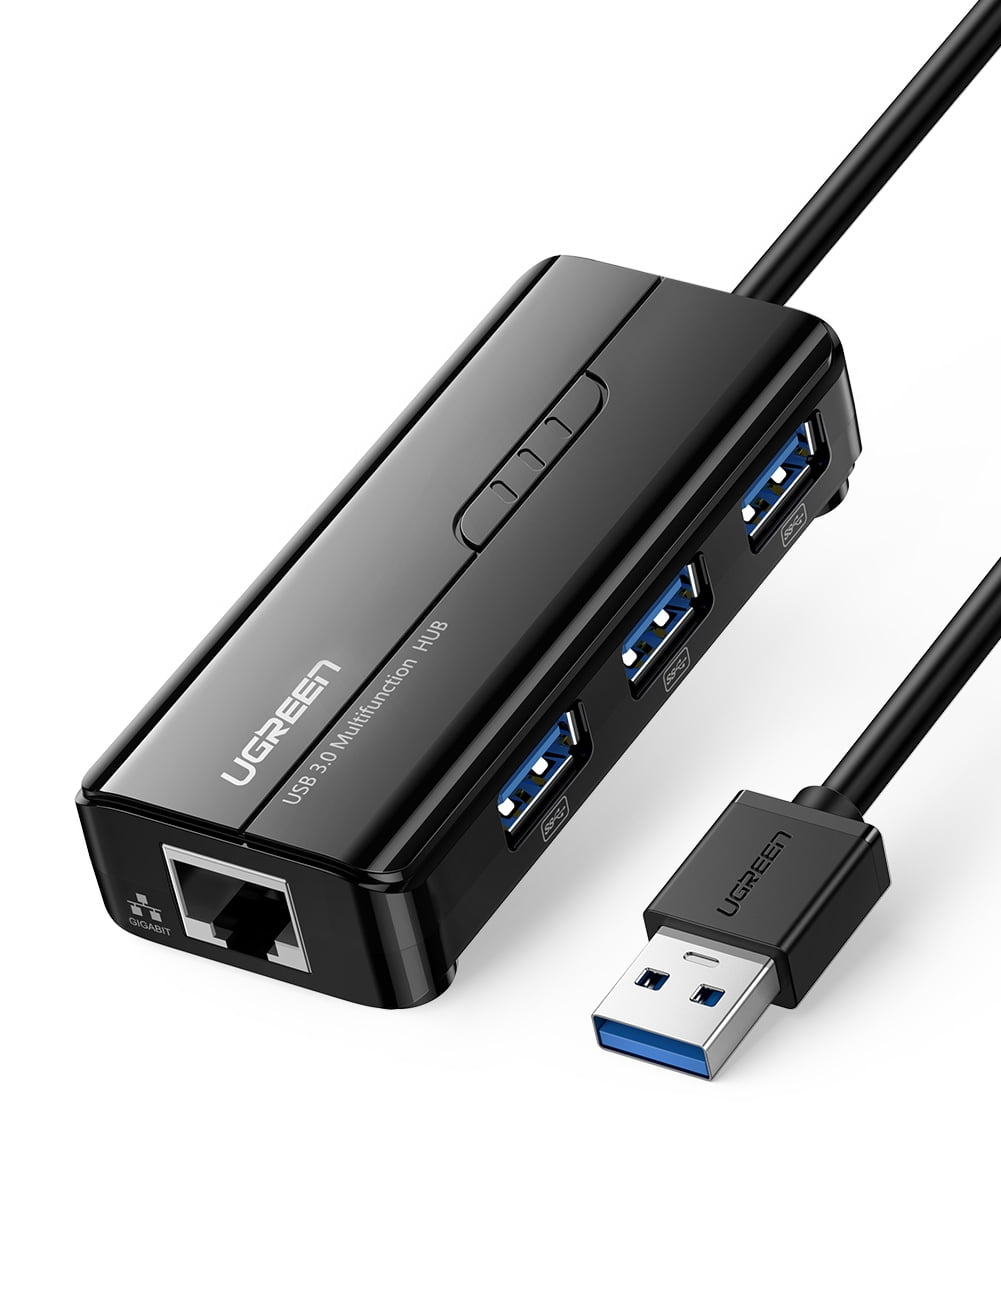 Cables USB 3.0 to Rj45 Occus LAN Adapter 3 Port USB Hub 3.0 Connector Extender Cable Length: Other